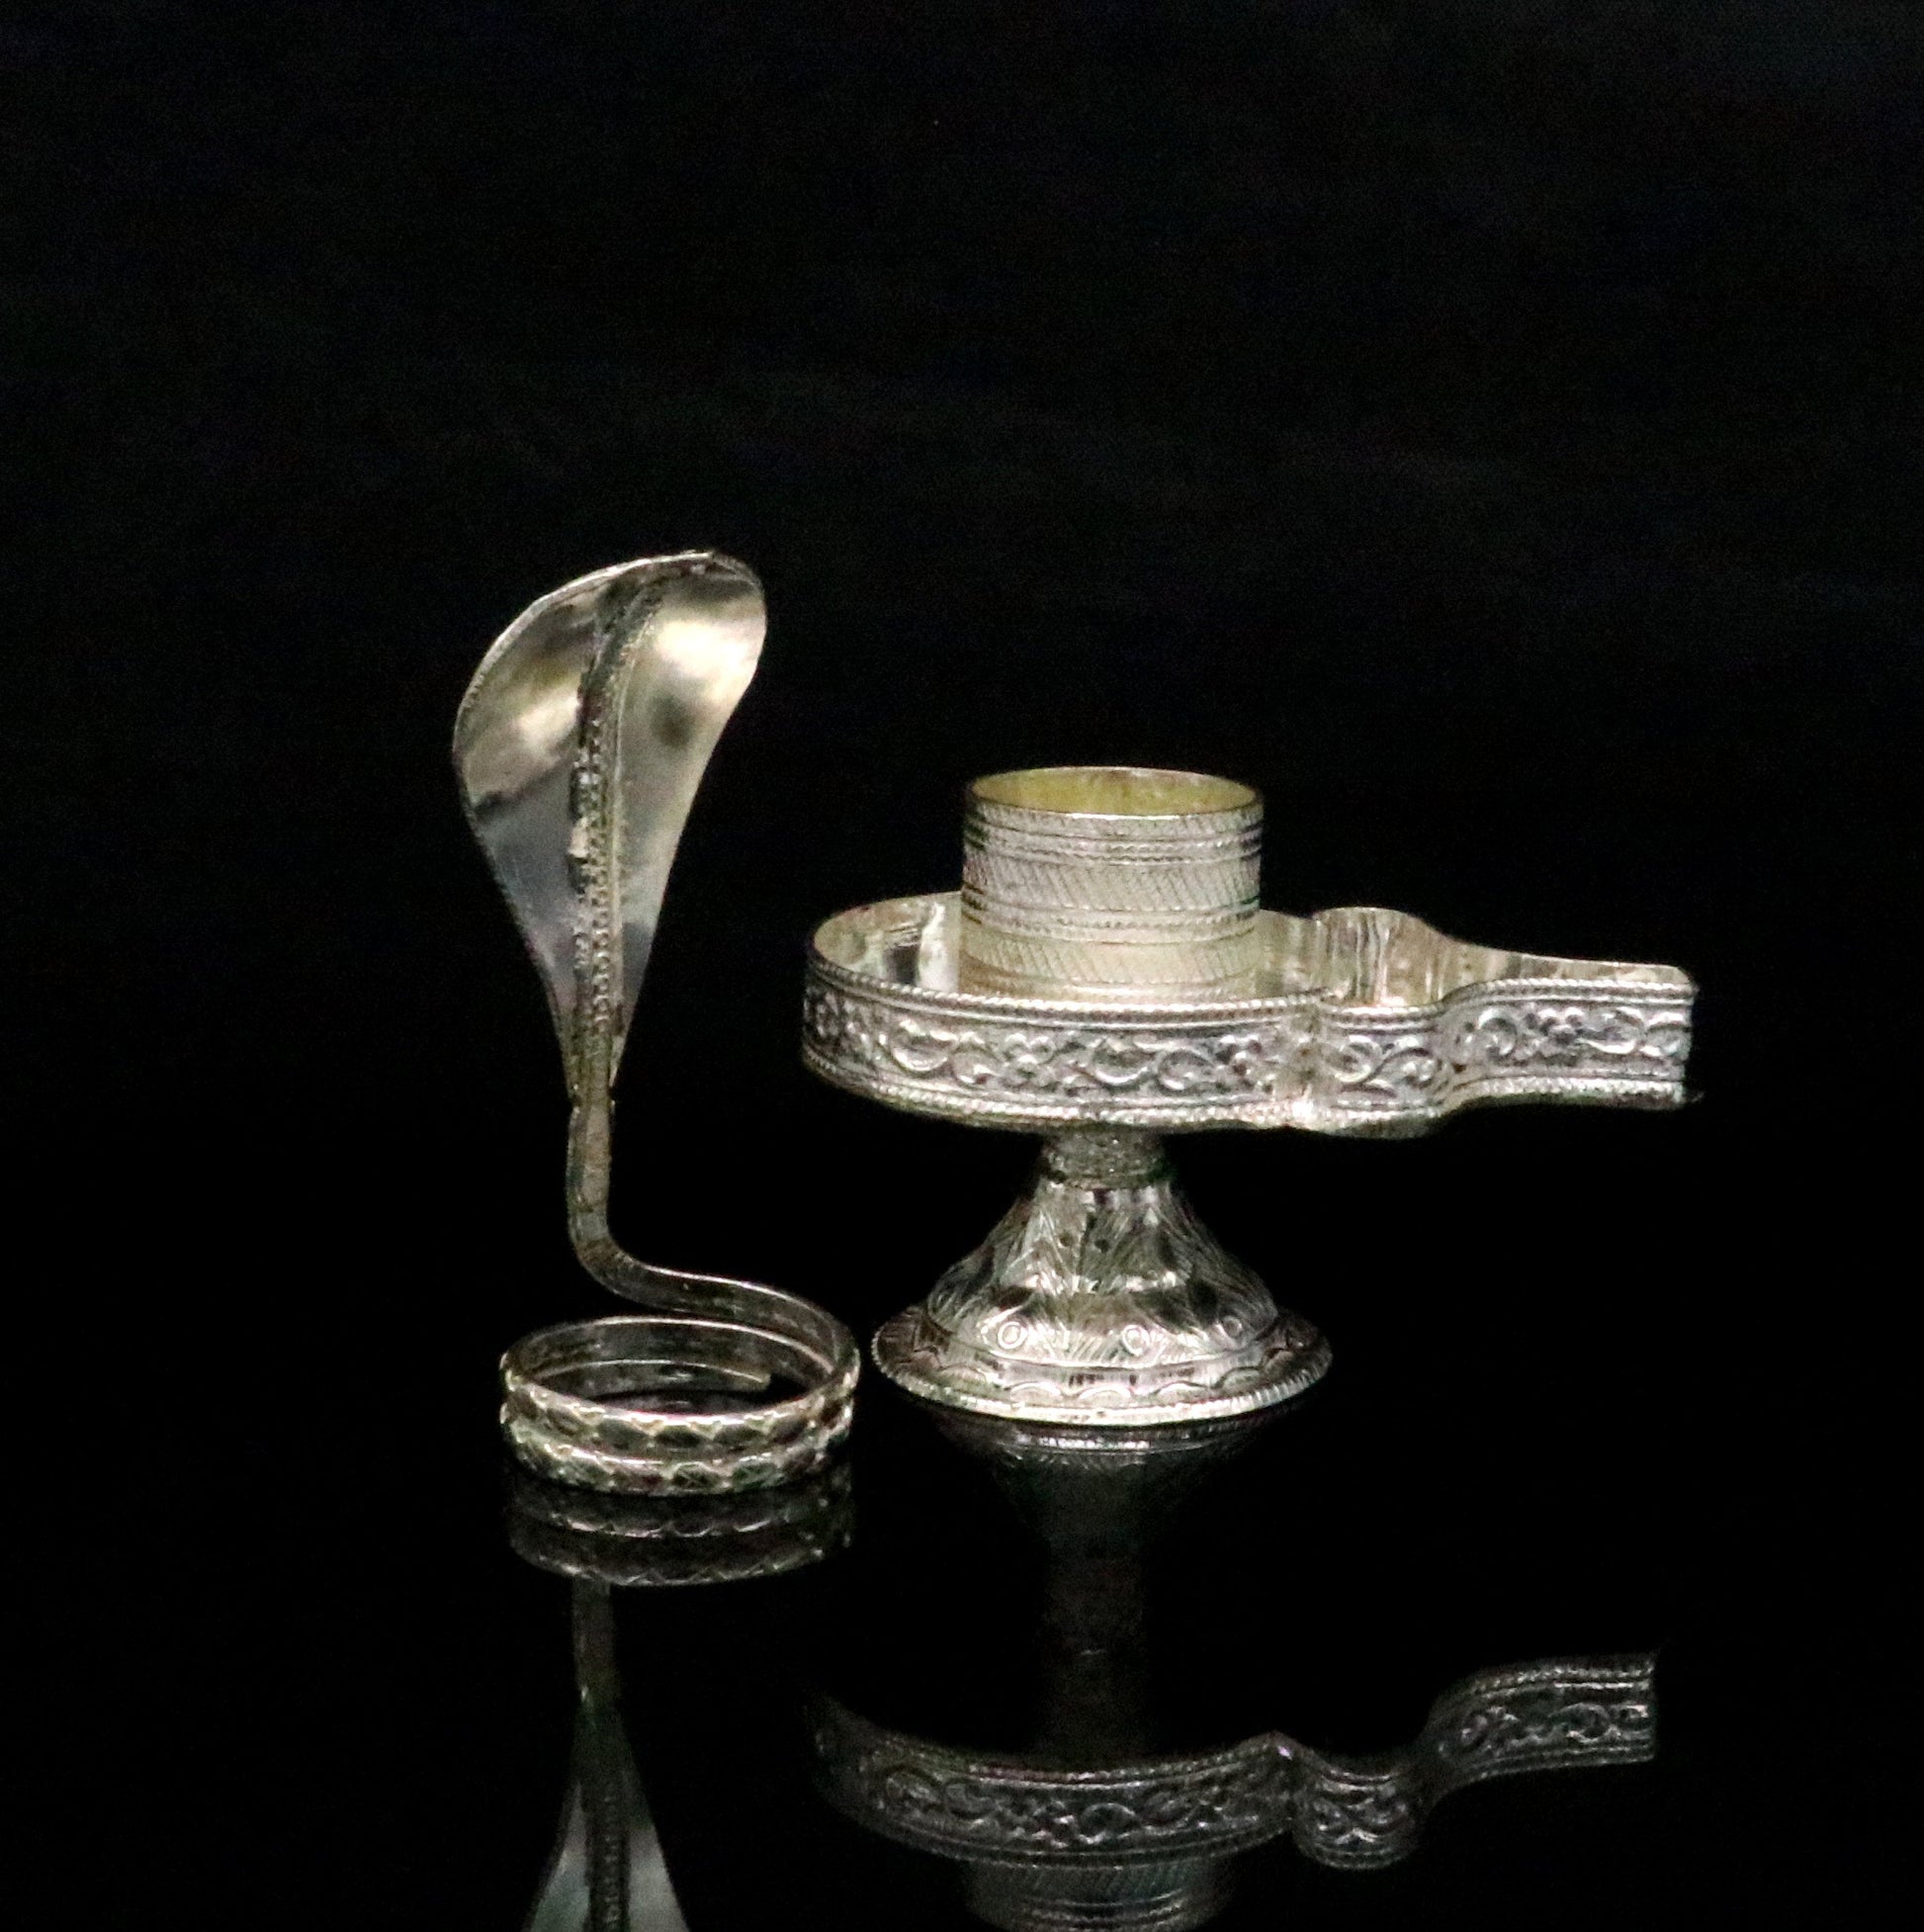 925 fine solid sterling silver lord shiva lingam stand/jalheri, use for put/hold shiva lingam in home temple, awesome handmade article su167 - TRIBAL ORNAMENTS